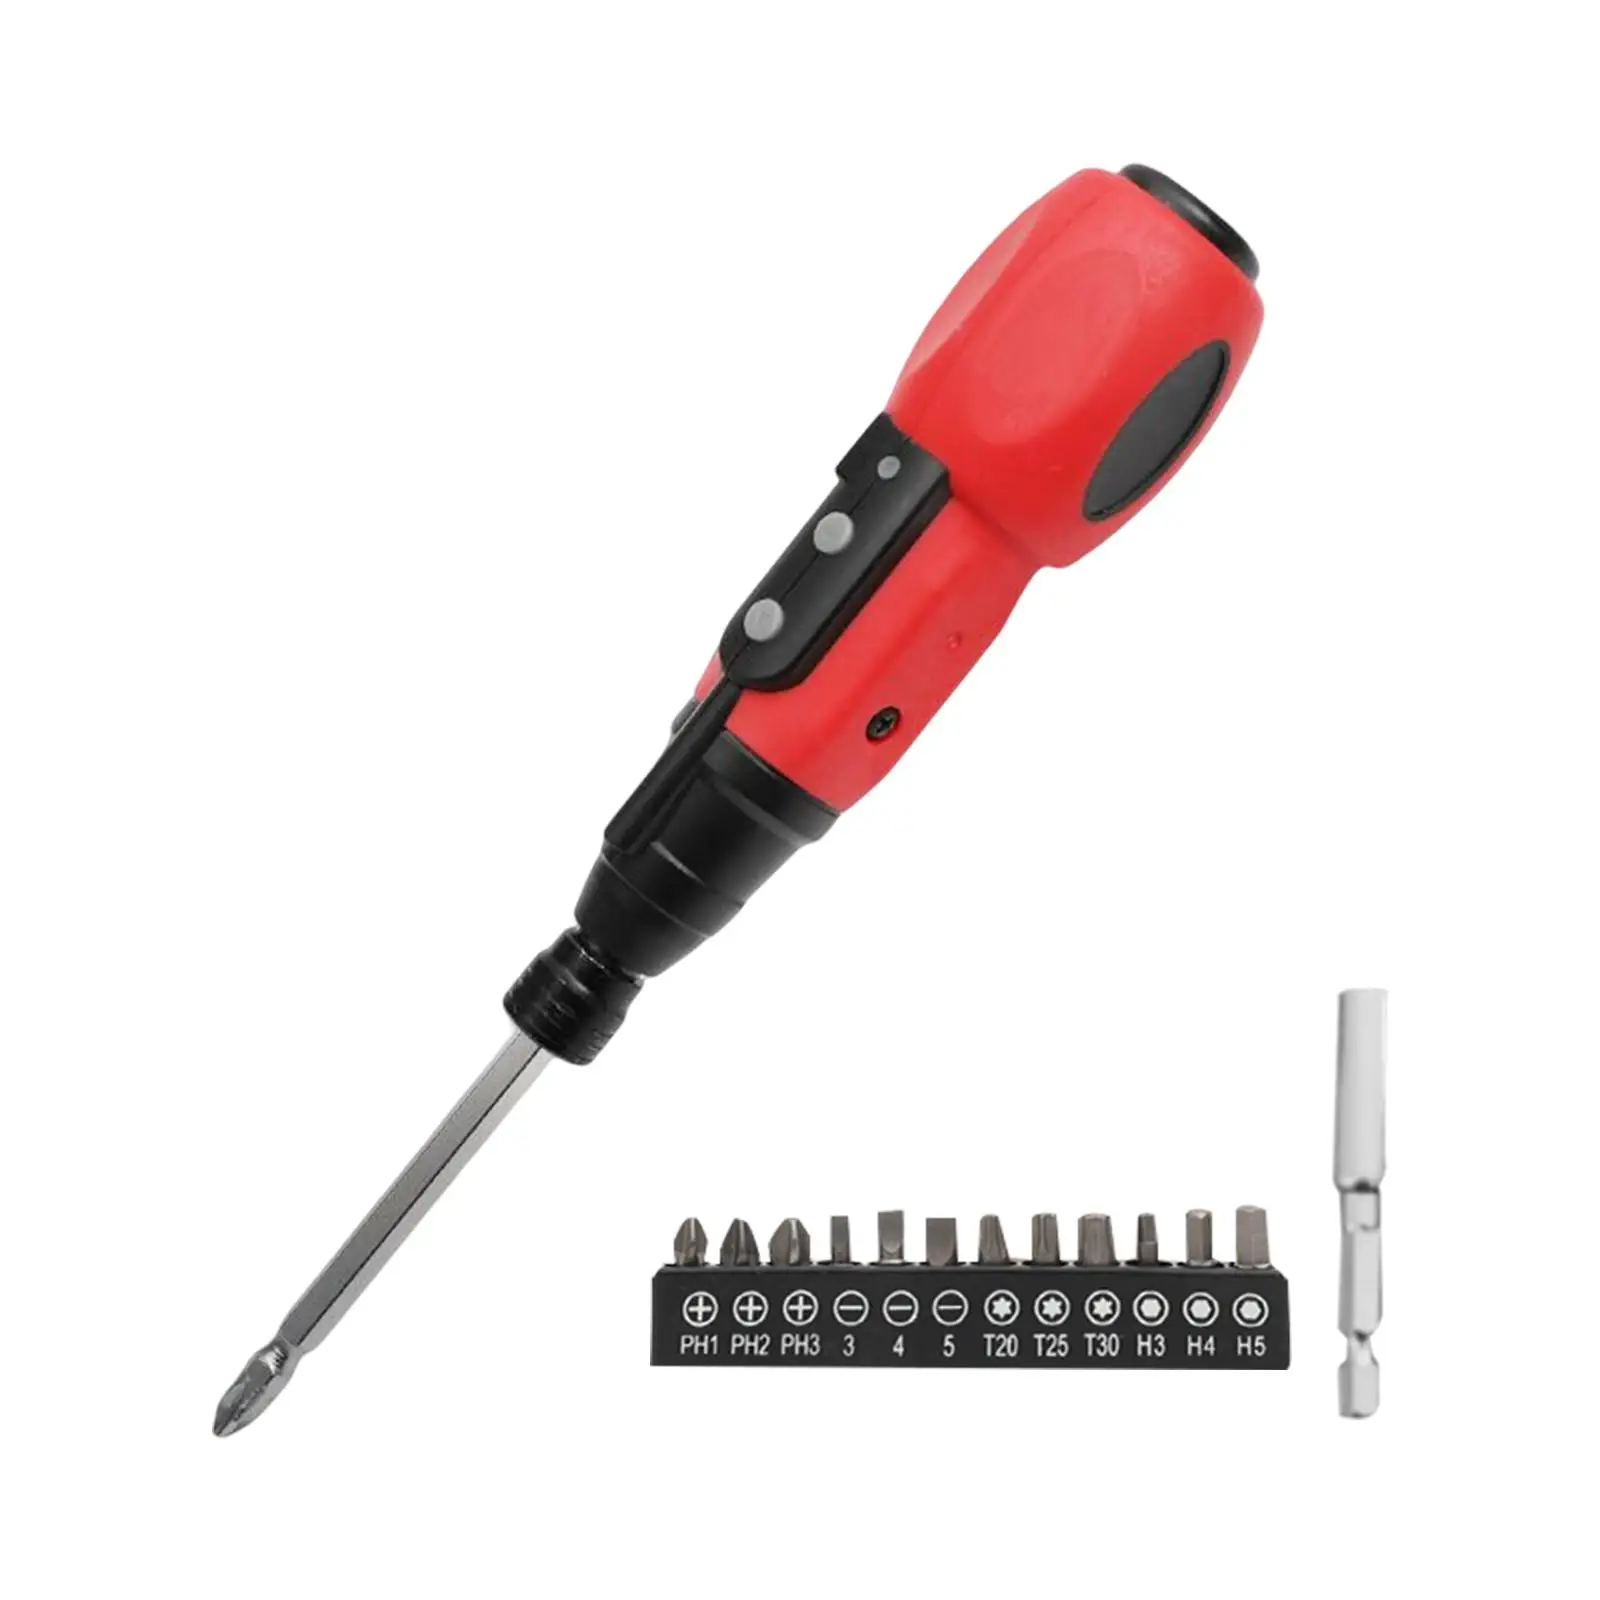 Cordless Screwdriver Set with Light Power Tools USB Rechargeable for Furniture Assembly